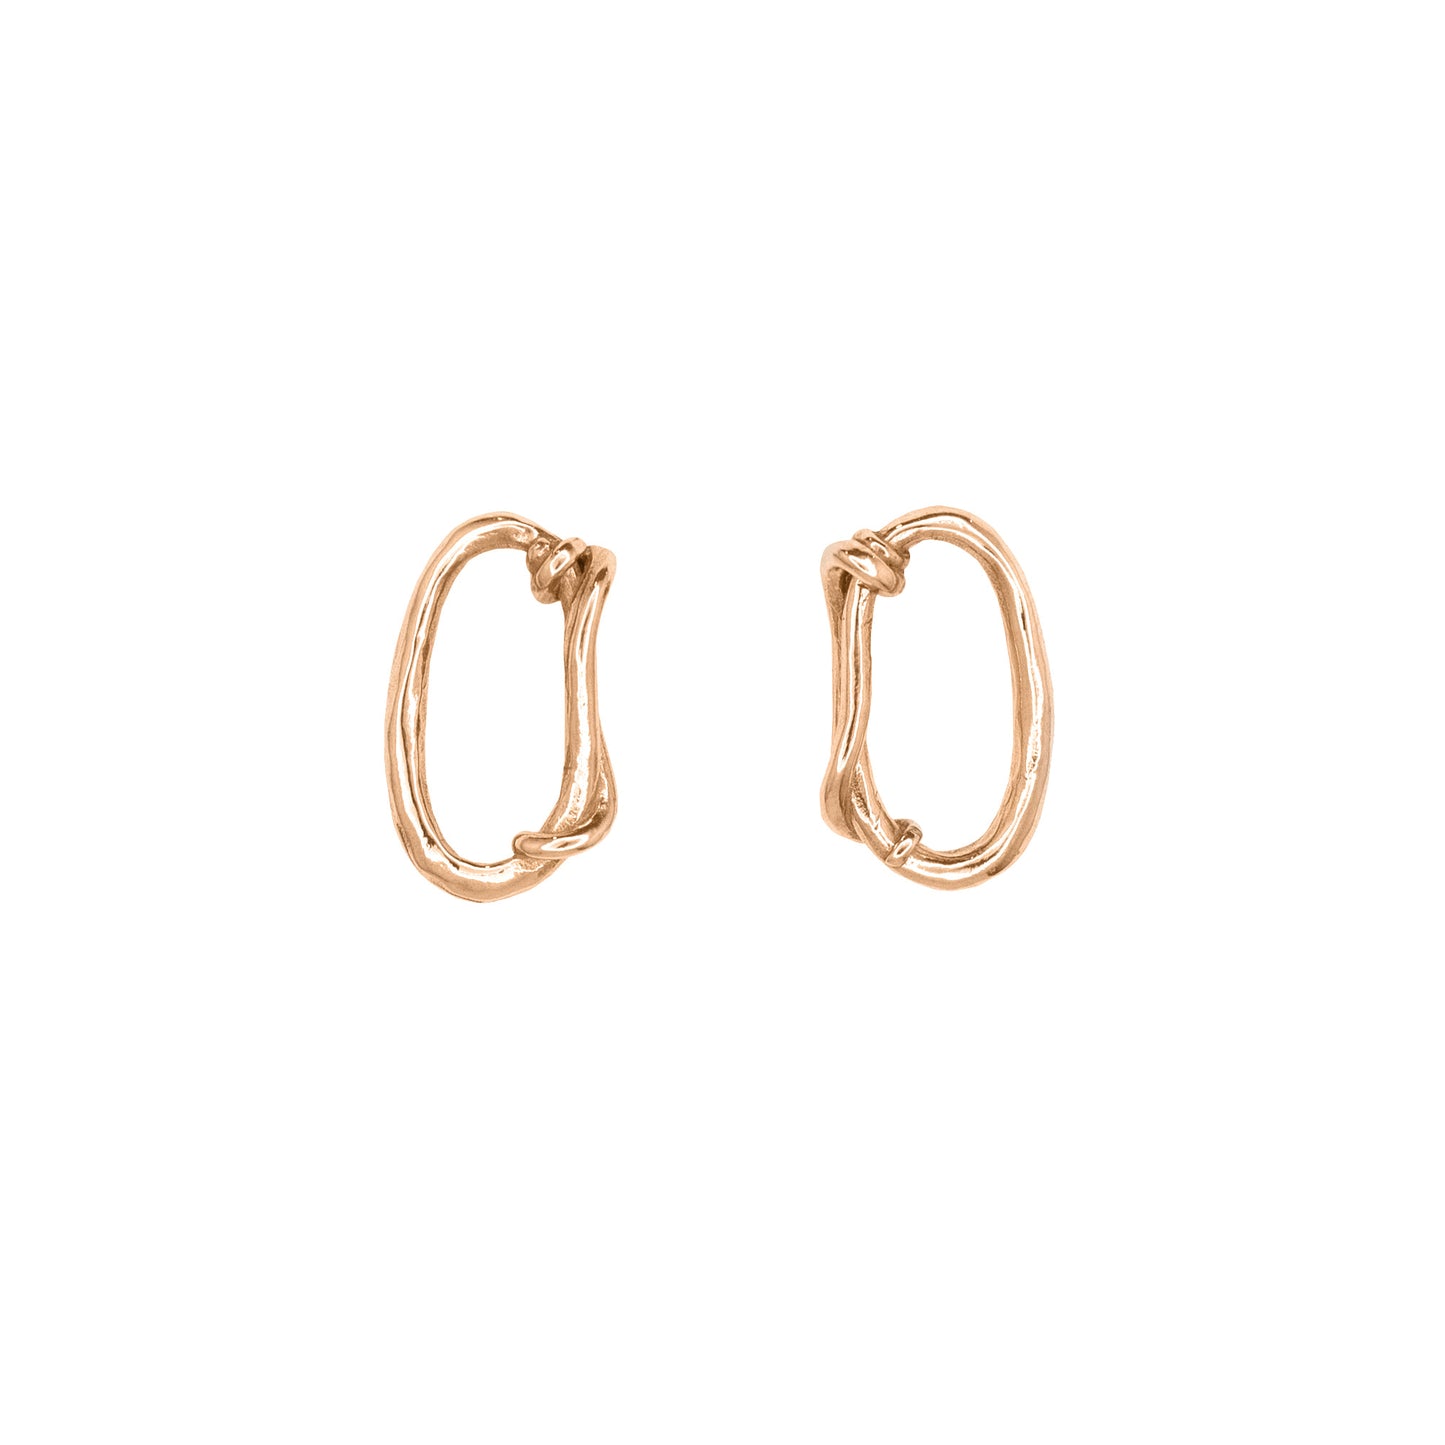 14k Oval Link White or Yellow Gold Posts